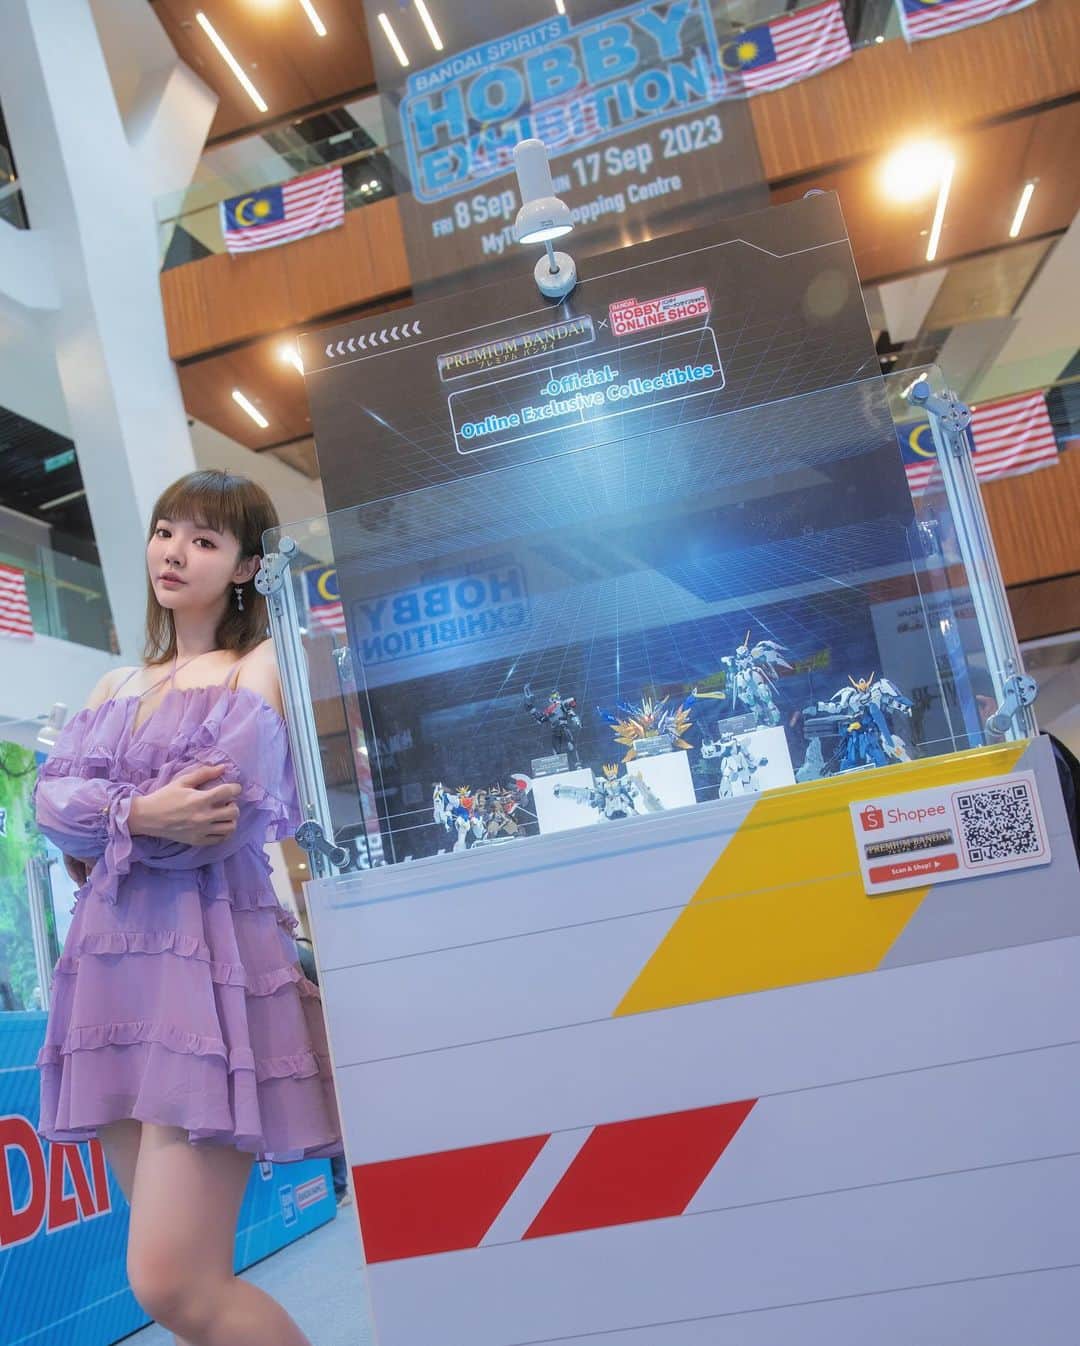 YingTzeのインスタグラム：「Come check out the "Bandai Spirits Hobby Exhibition” at MyTOWN Shopping Centre in Malaysia! ❤️ Get ready to take photos with the 3-metre RX-78 GUNDAM statue. Don't miss the chance to preview various prototypes of PREMIUM BANDAI limited model kits, first-ever showcase  in Malaysia! Let's have a blast together all GUNDAM fans! 🥰  Apart from the mall event, fans can also make purchases from the PREMIUM BANDAI Shopee online store during Shopee 9.9 👉🏻 https://bit.ly/47LW1hN   Remember to follow @pbandai_asia for hot released collectibles❤️  📍 Bandai Spirits Hobby Exhibition Date: 8th - 17th September 2023 Time: 10am - 10pm Venue: MyTOWN Shopping Centre  #PREMIUMBANDAIASIA #BandaiSpiritsHobbyExhibition #GUNDAM」